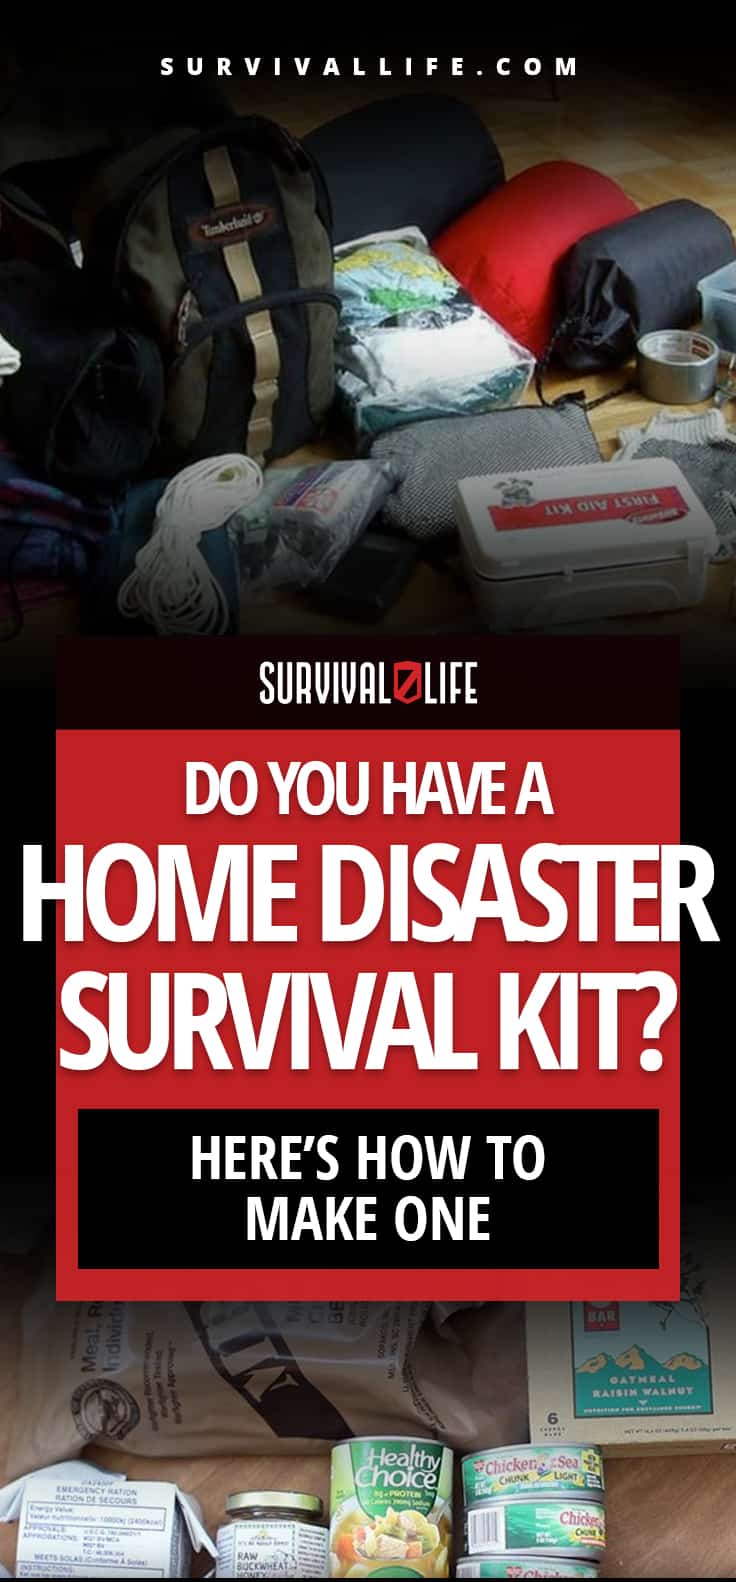 Do You Have A Home Disaster Survival Kit? Here’s How To Make One